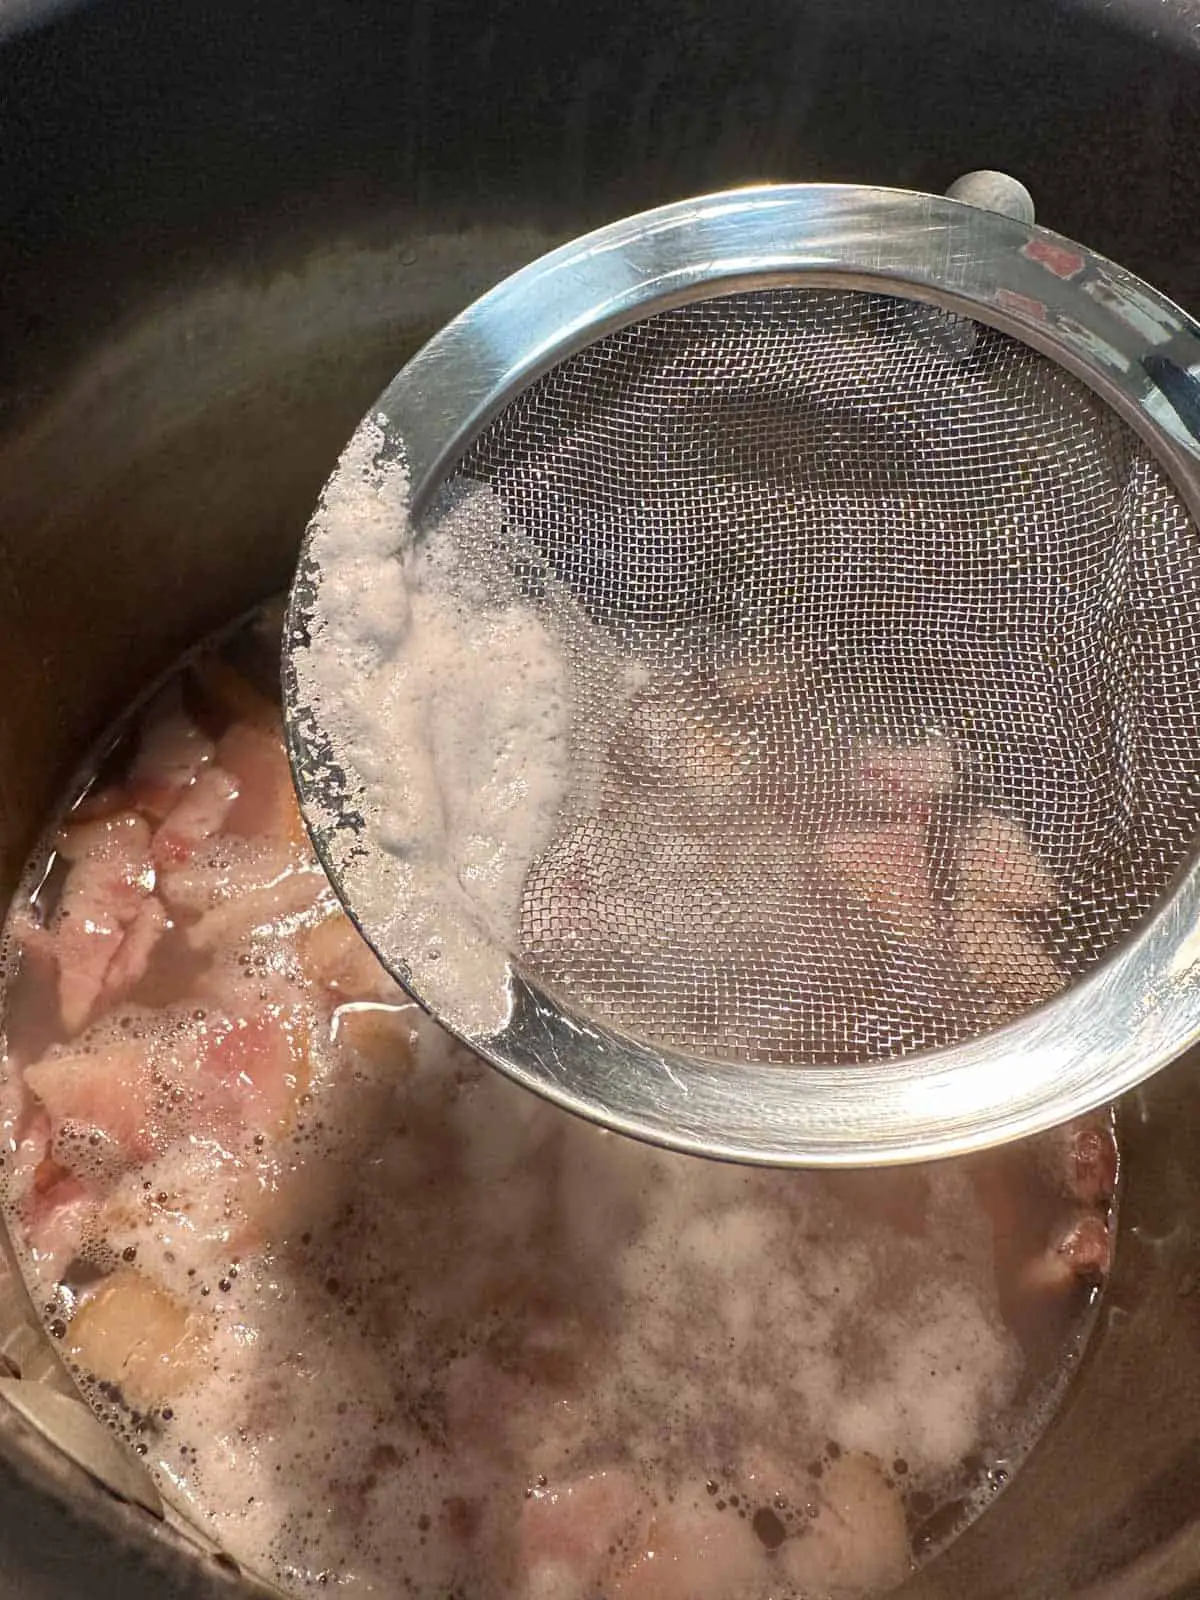 A large pot containing water, bacon, pinto beans, and scum. There is a strainer spoon over the pot containing some scum scooped up from the top of the broth.